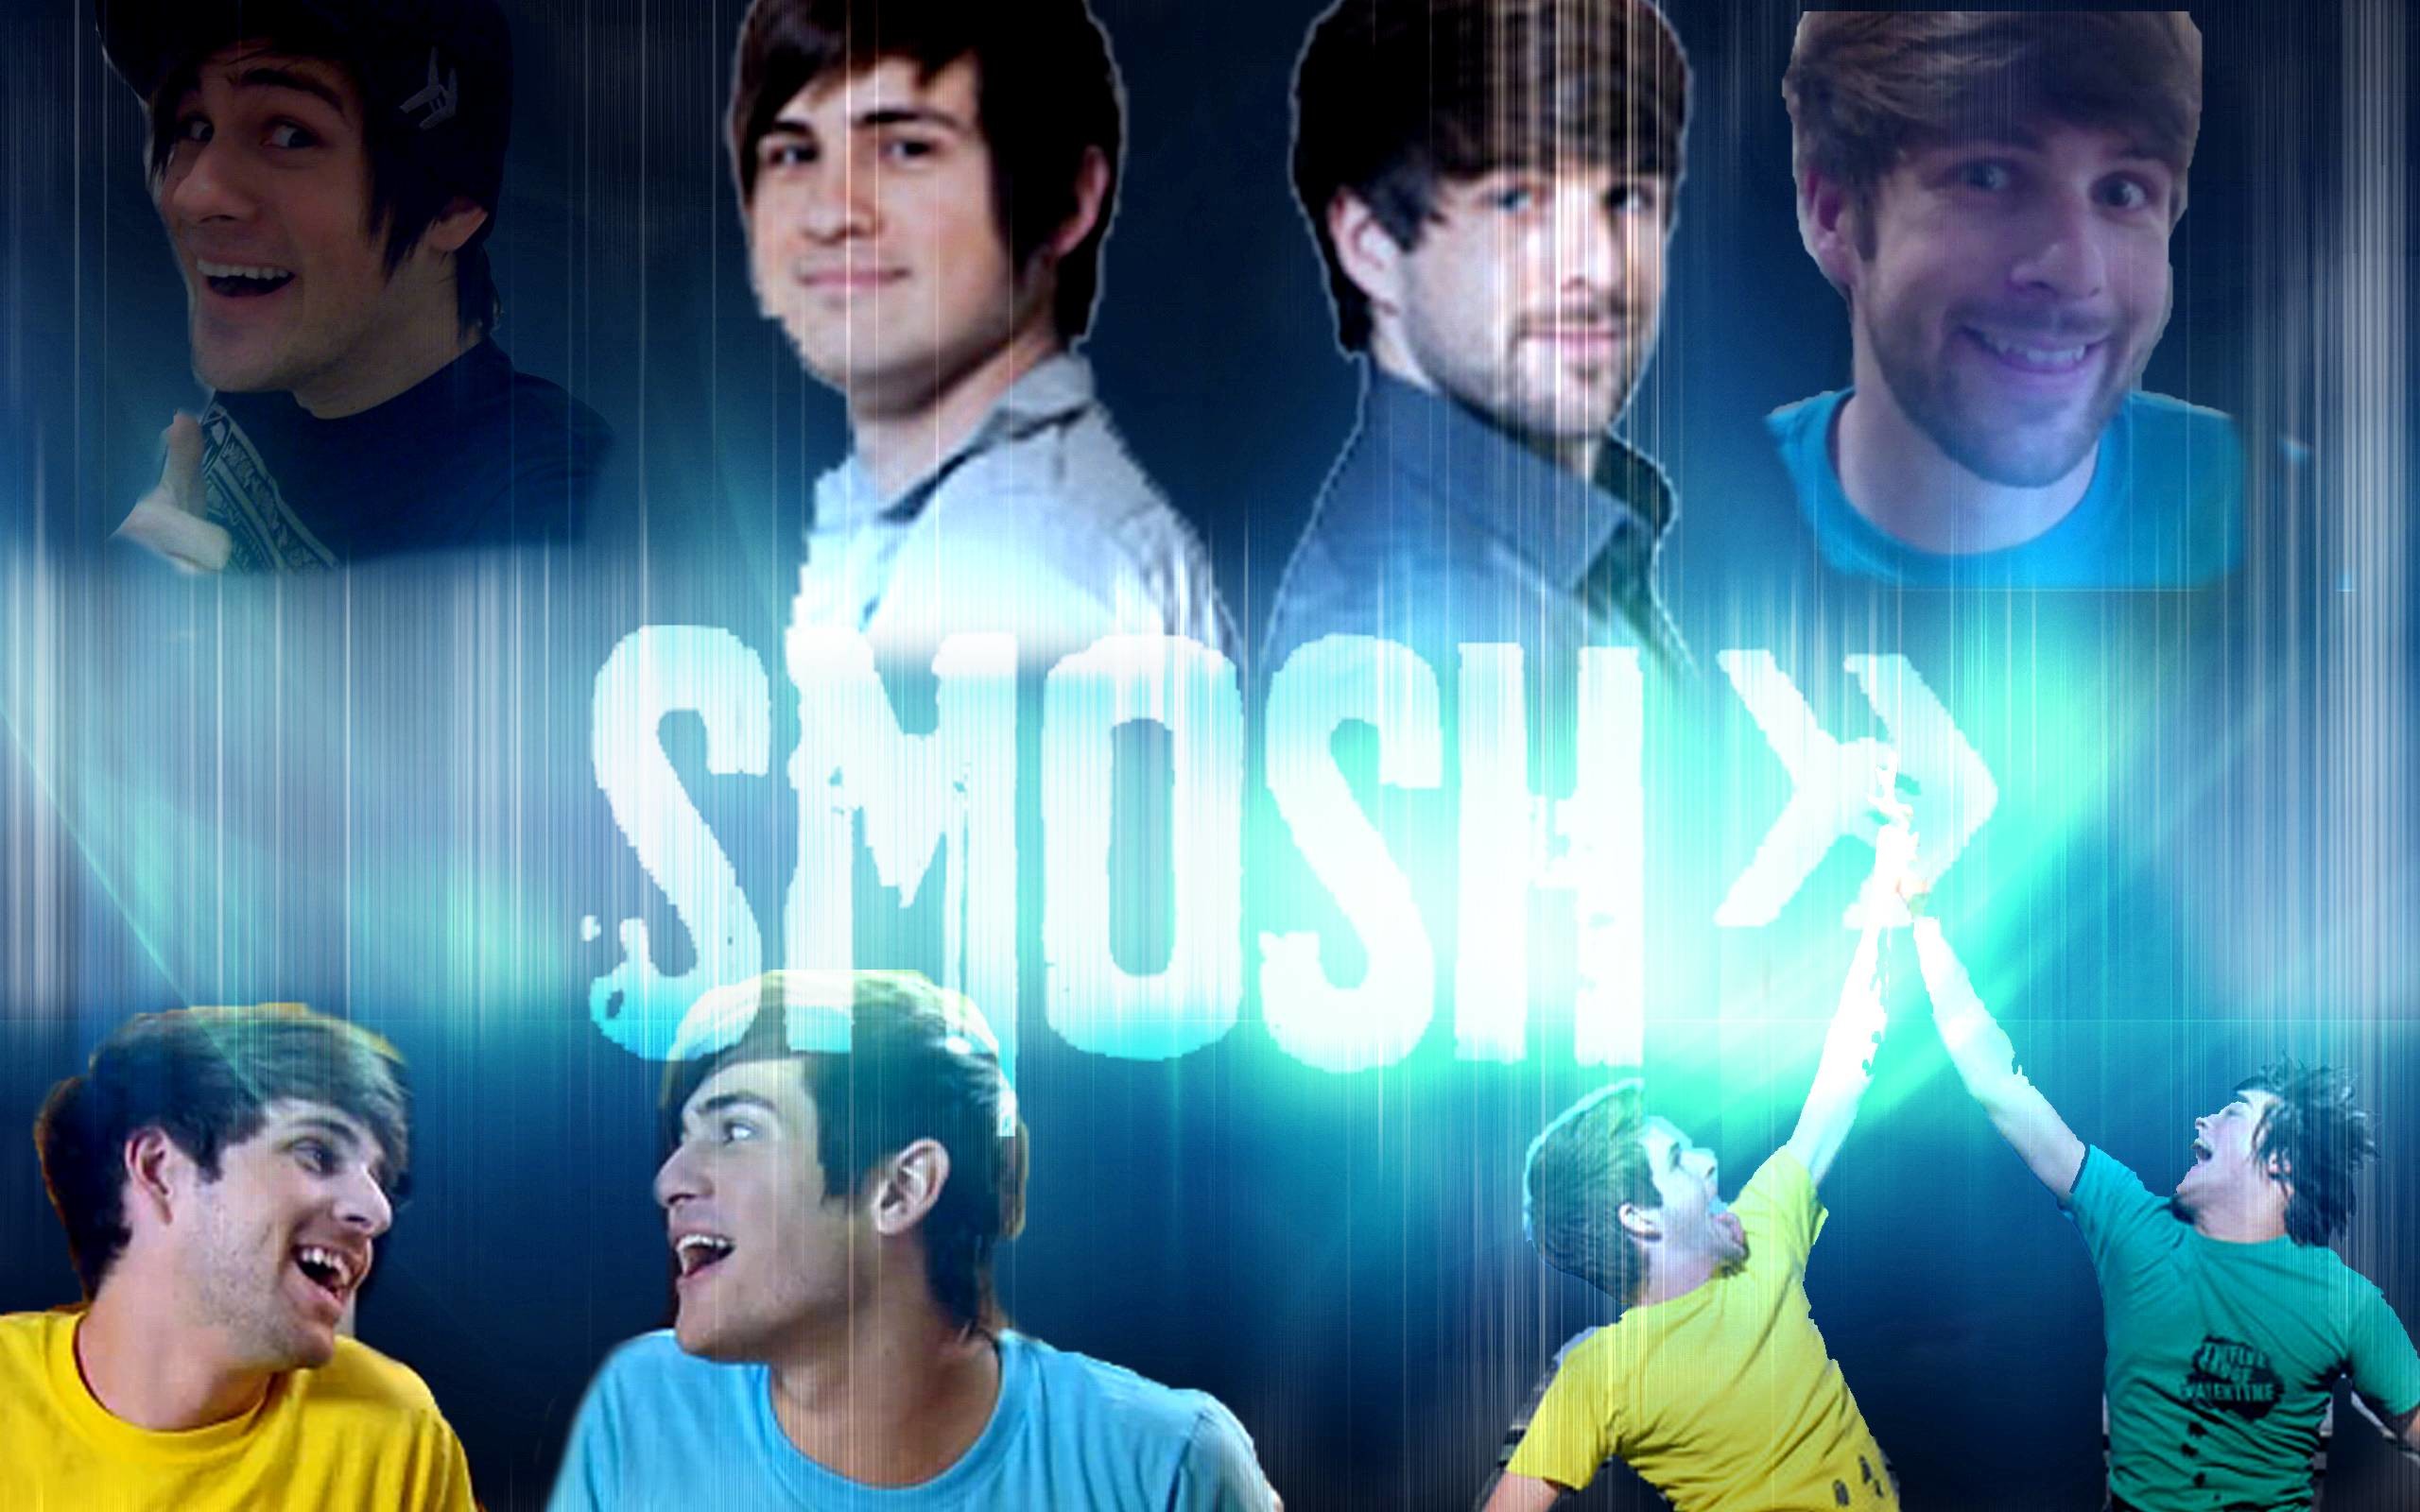 2560x1600 Smosh wallpaper by MsWillow999 on DeviantArt